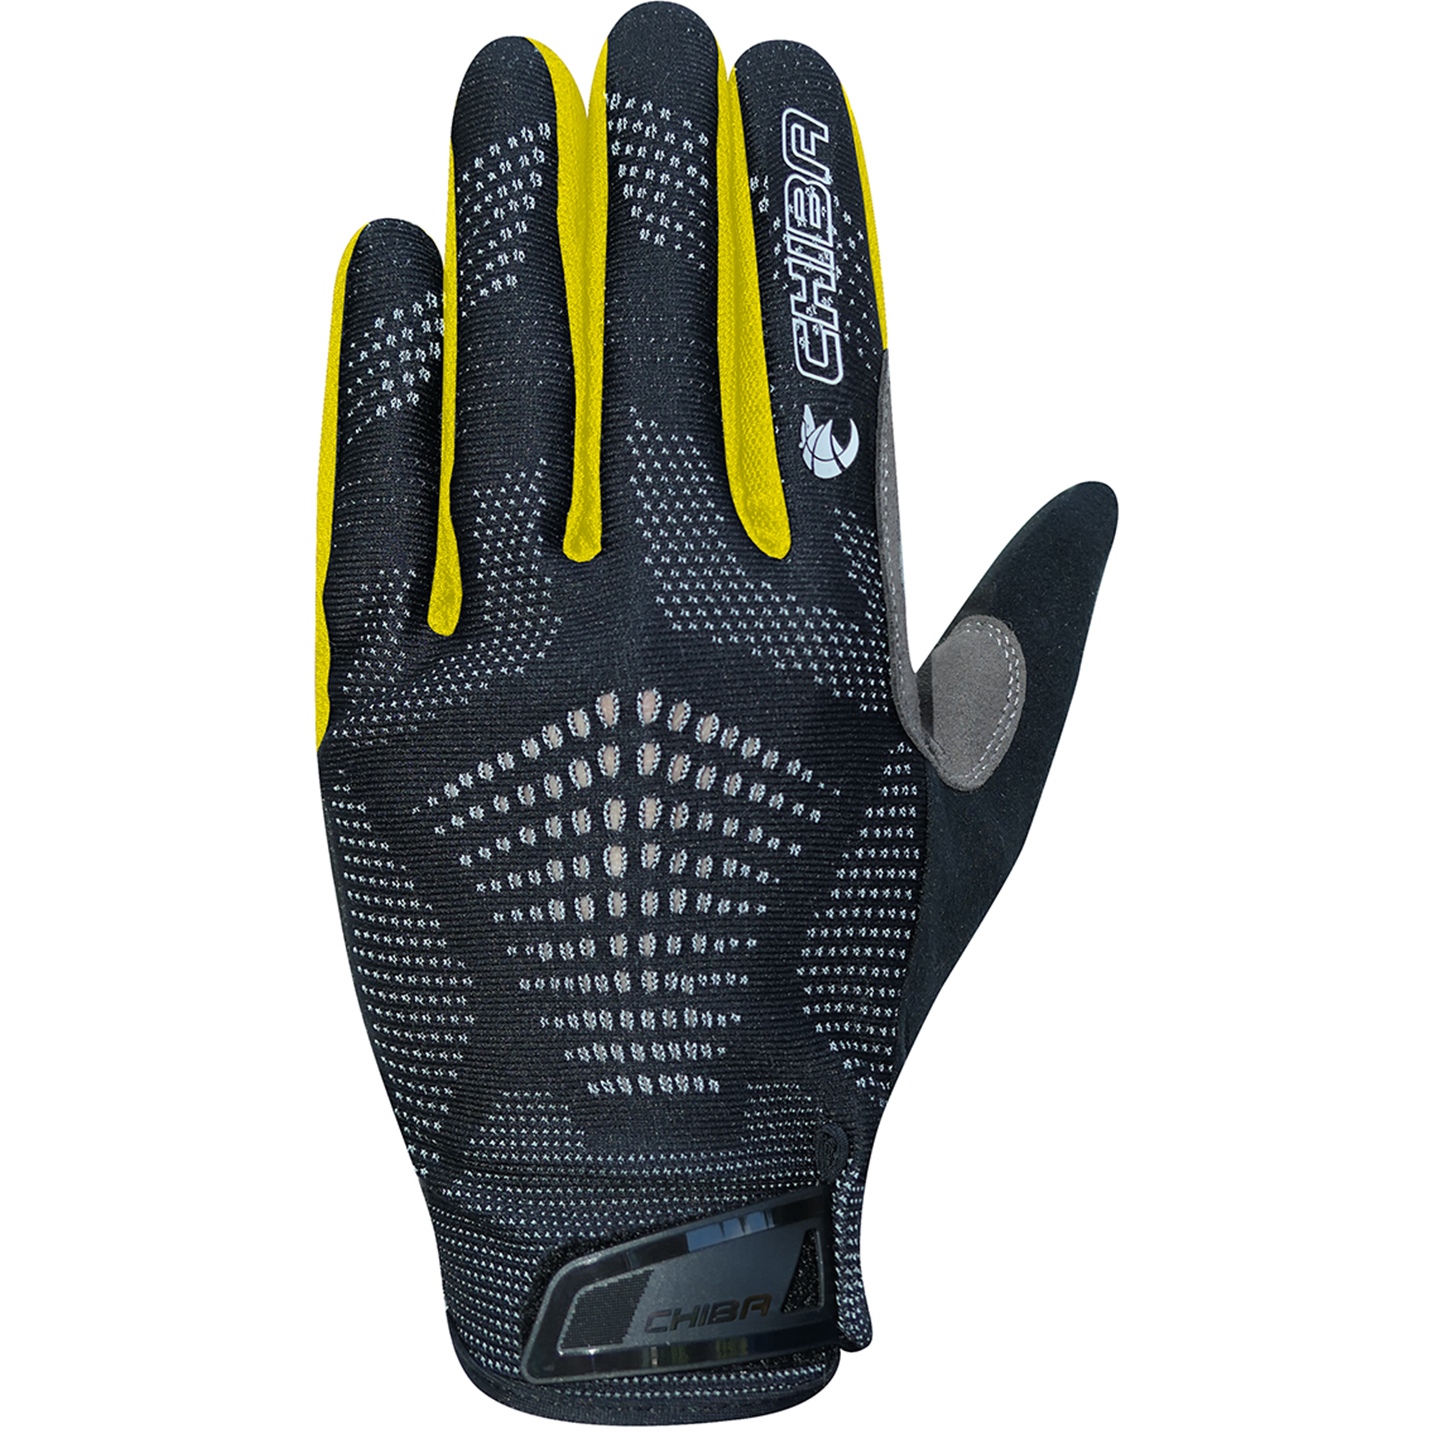 Picture of Chiba Gel Performer Cycling Gloves - black/neon yellow